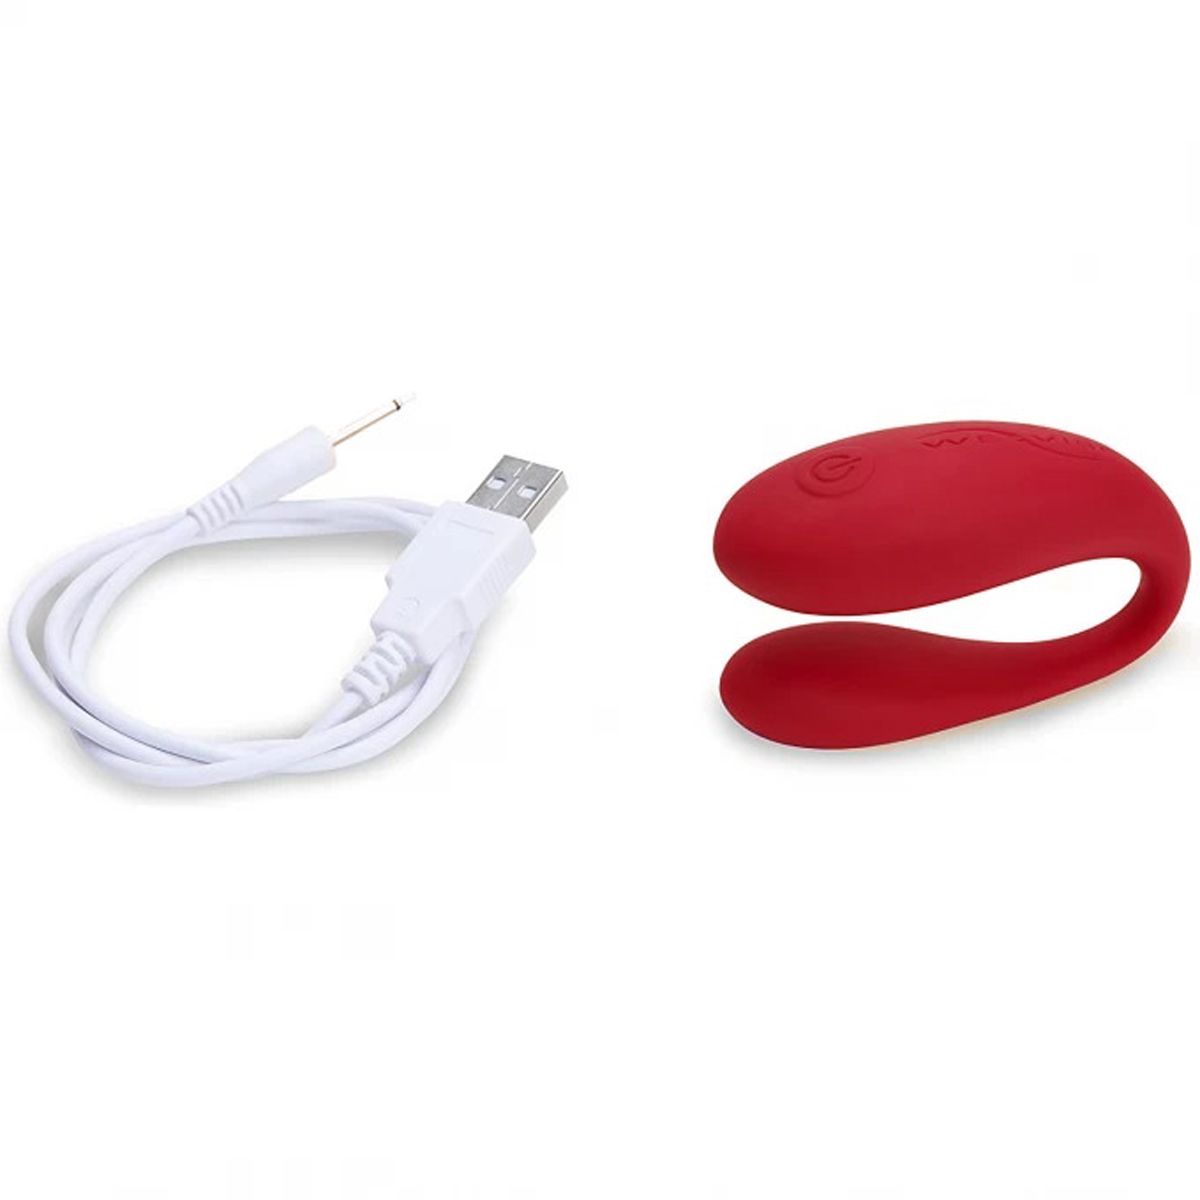 We-Vibe Special Edition Rechargeable Couples Vibrator - Red - Thorn & Feather